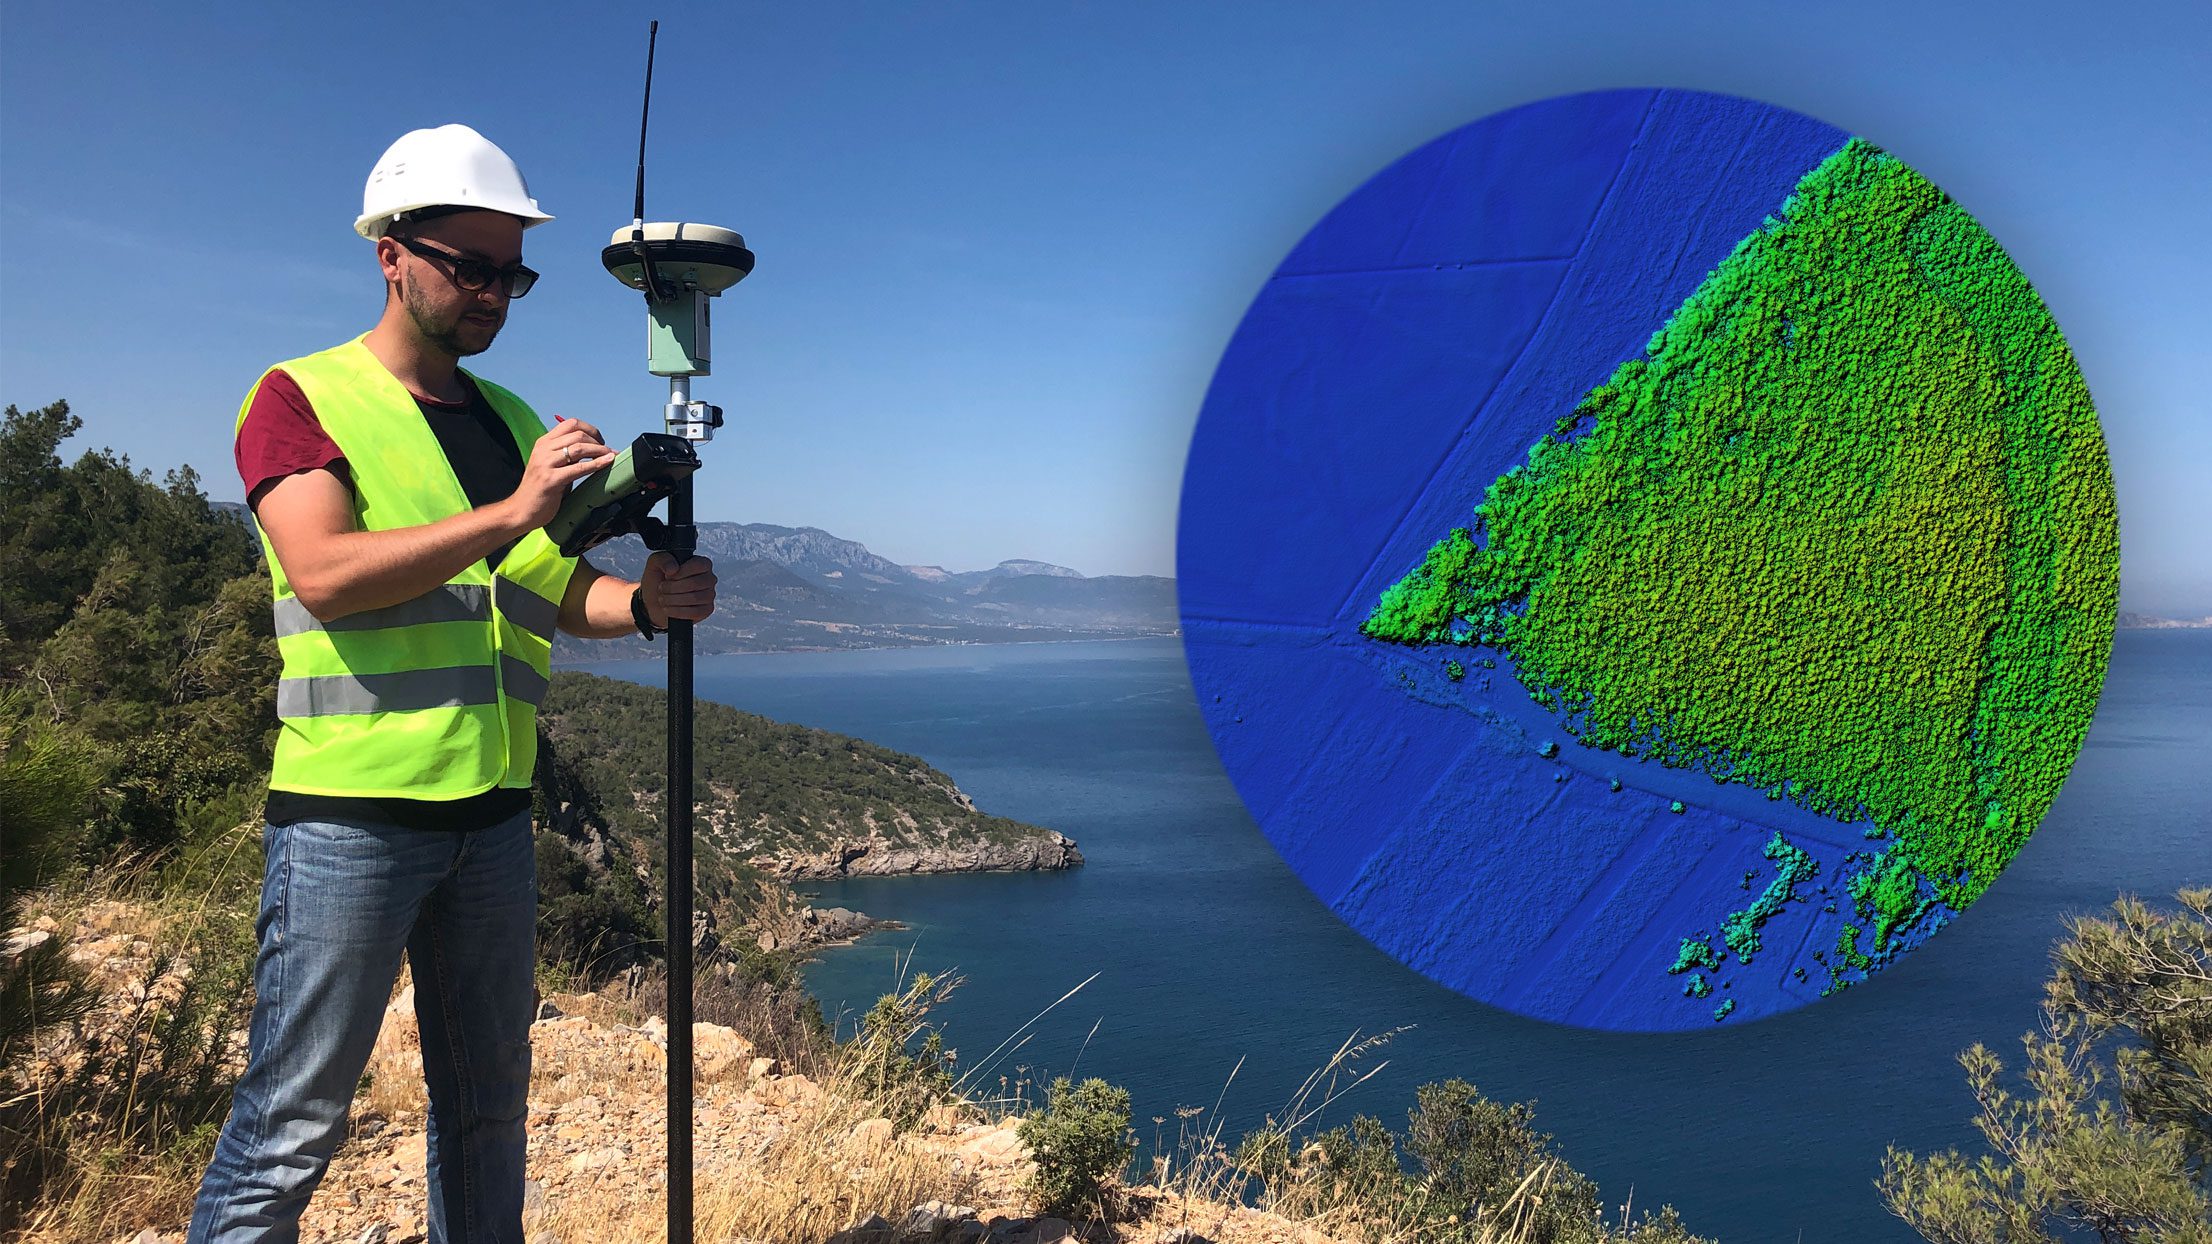 Pic: Surveyor outside with inset diagram of GIS water network